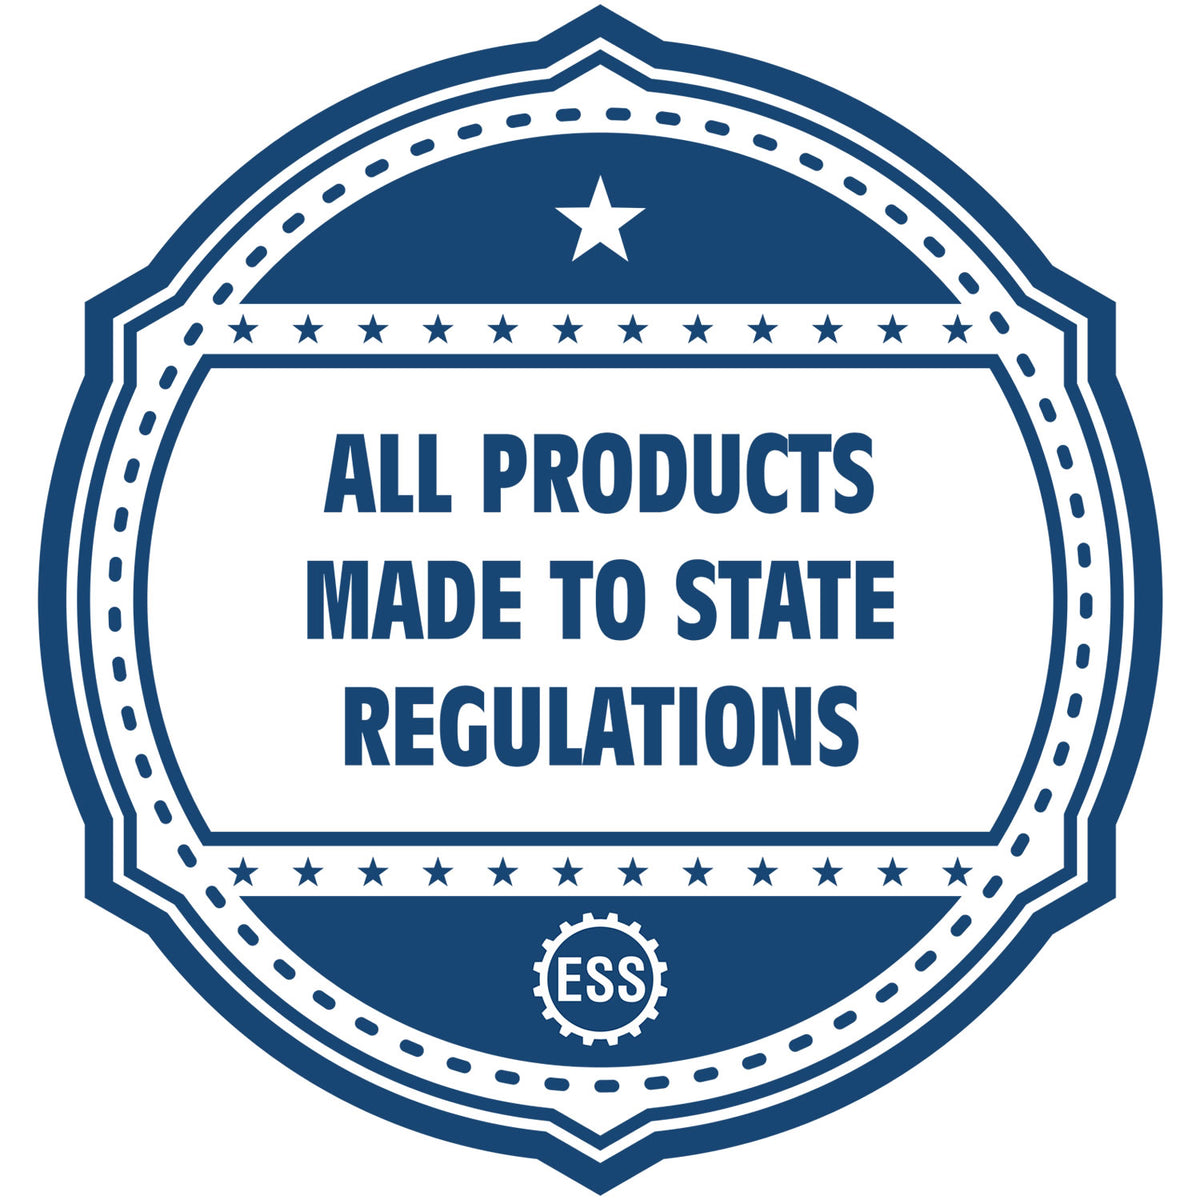 An icon or badge element for the State of New Jersey Soft Land Surveyor Embossing Seal showing that this product is made in compliance with state regulations.